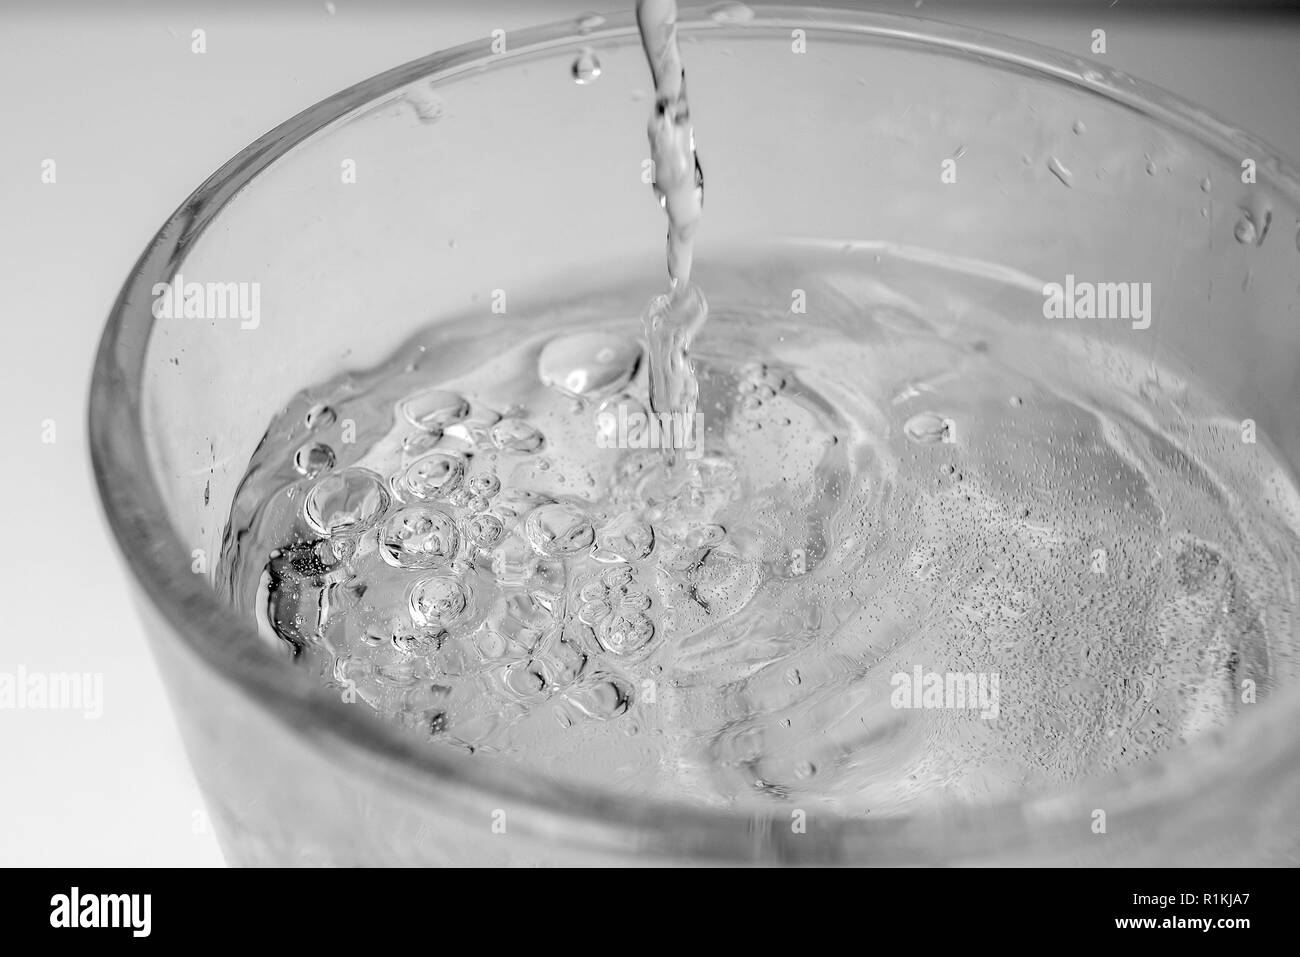 Pouring water from bottle into glass on white background Stock Photo